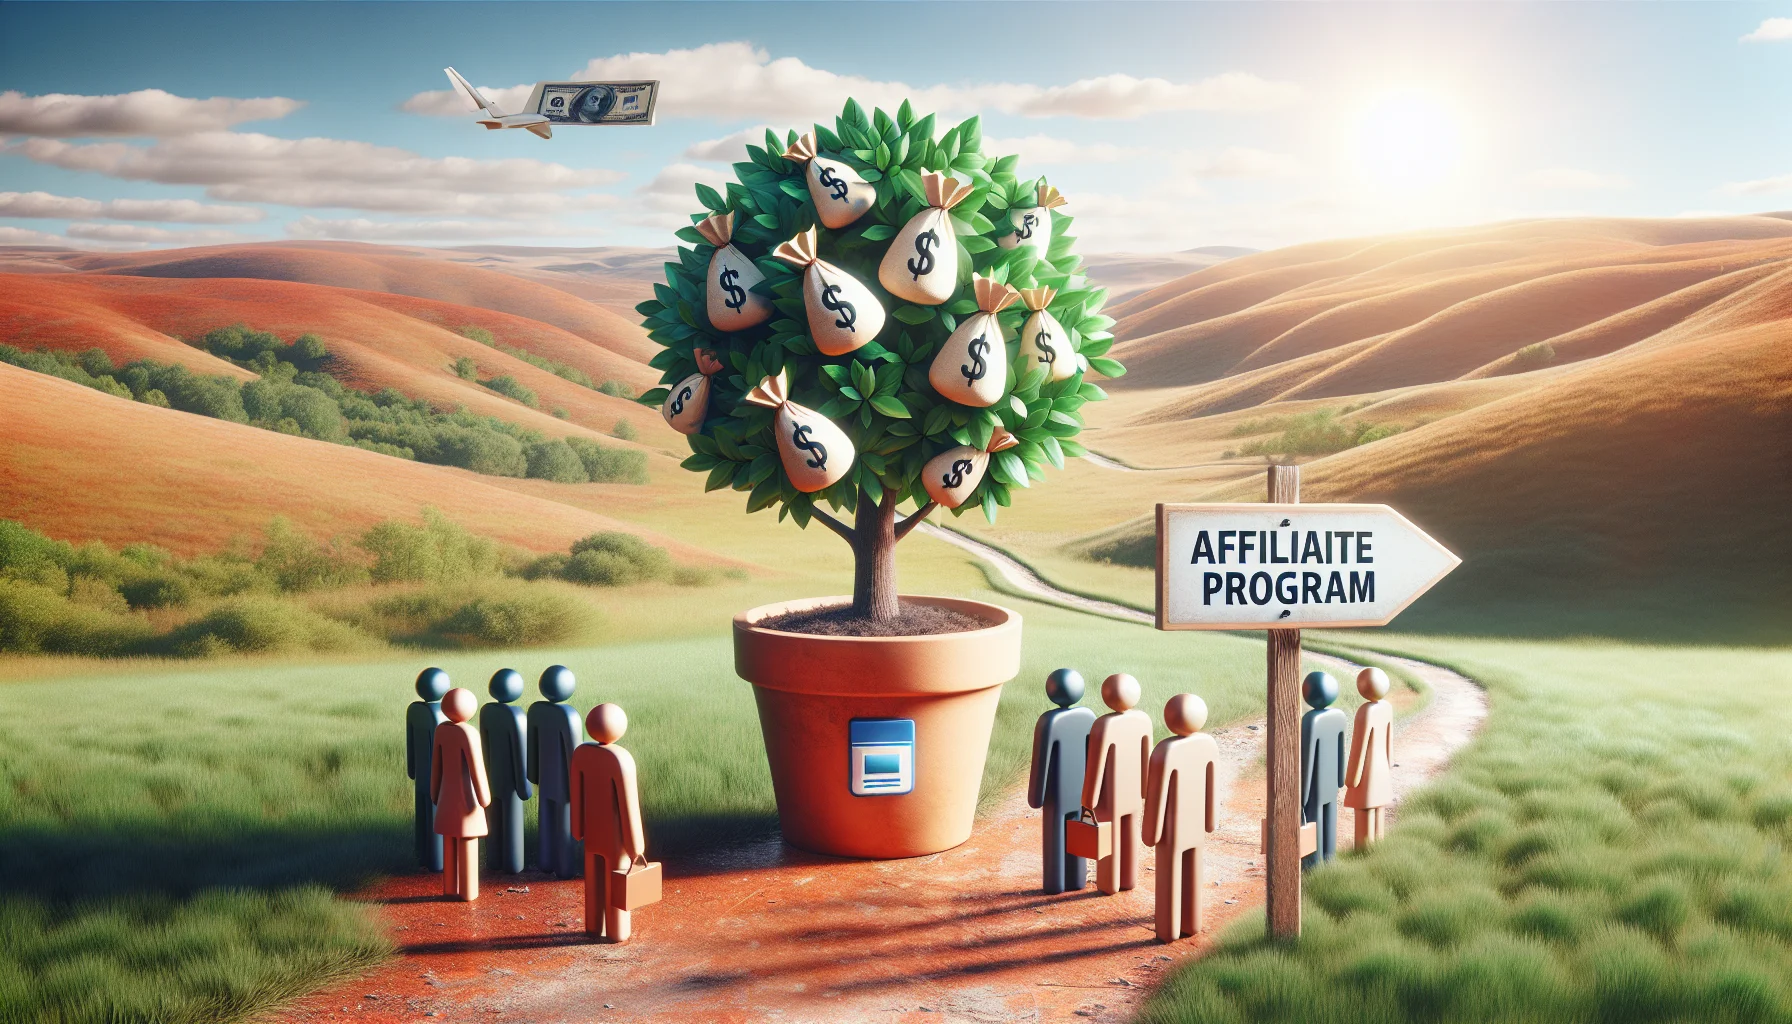 A humorous yet realistic scene depicting an affiliate marketing program, represented by a metaphorical money tree growing in a pot with an internet browser icon on it. The tree is bearing fruit that are dollar bills, indicating the potential of earning money online. Grounded in nature, is an alluring countryside backdrop with lush, rolling hills under a sunny sky. A minimalistic signpost with the words 'Affiliate Program' is pointing towards the money tree, attracting a diverse crowd of individual, each represented with a different descent and gender, who seem intrigued and excited.